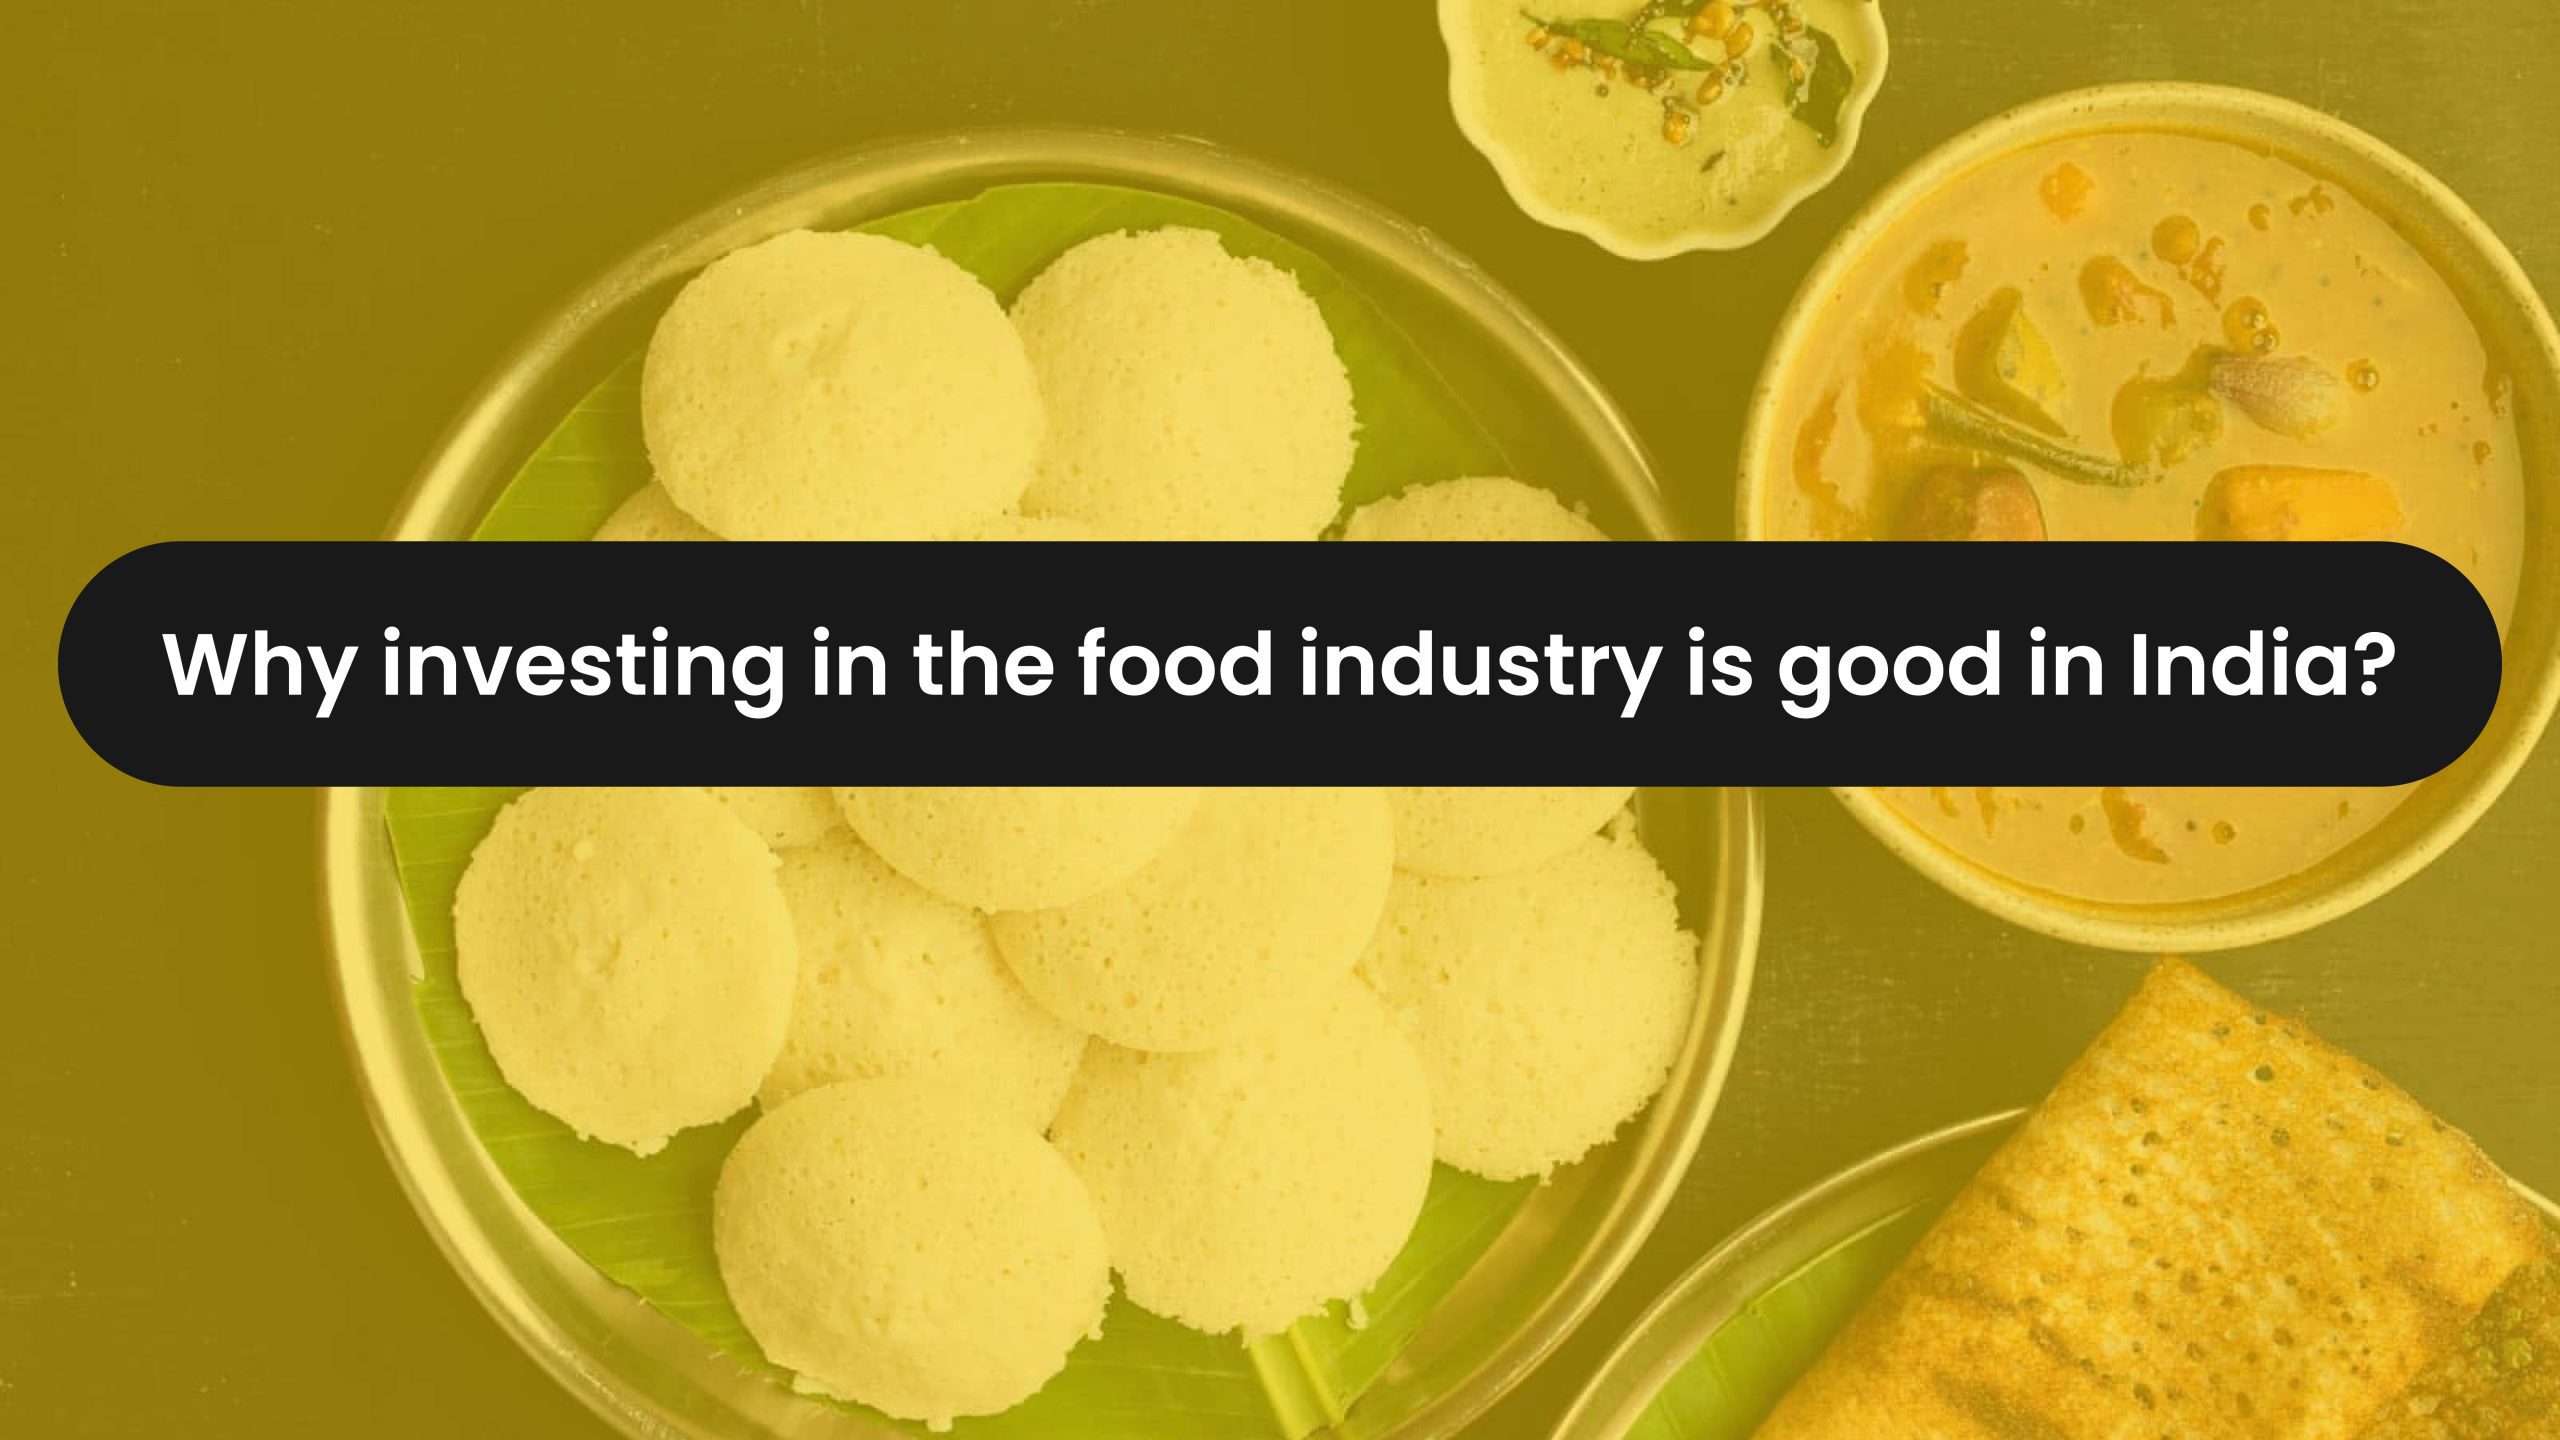 Why investing in the food industry is good in India?